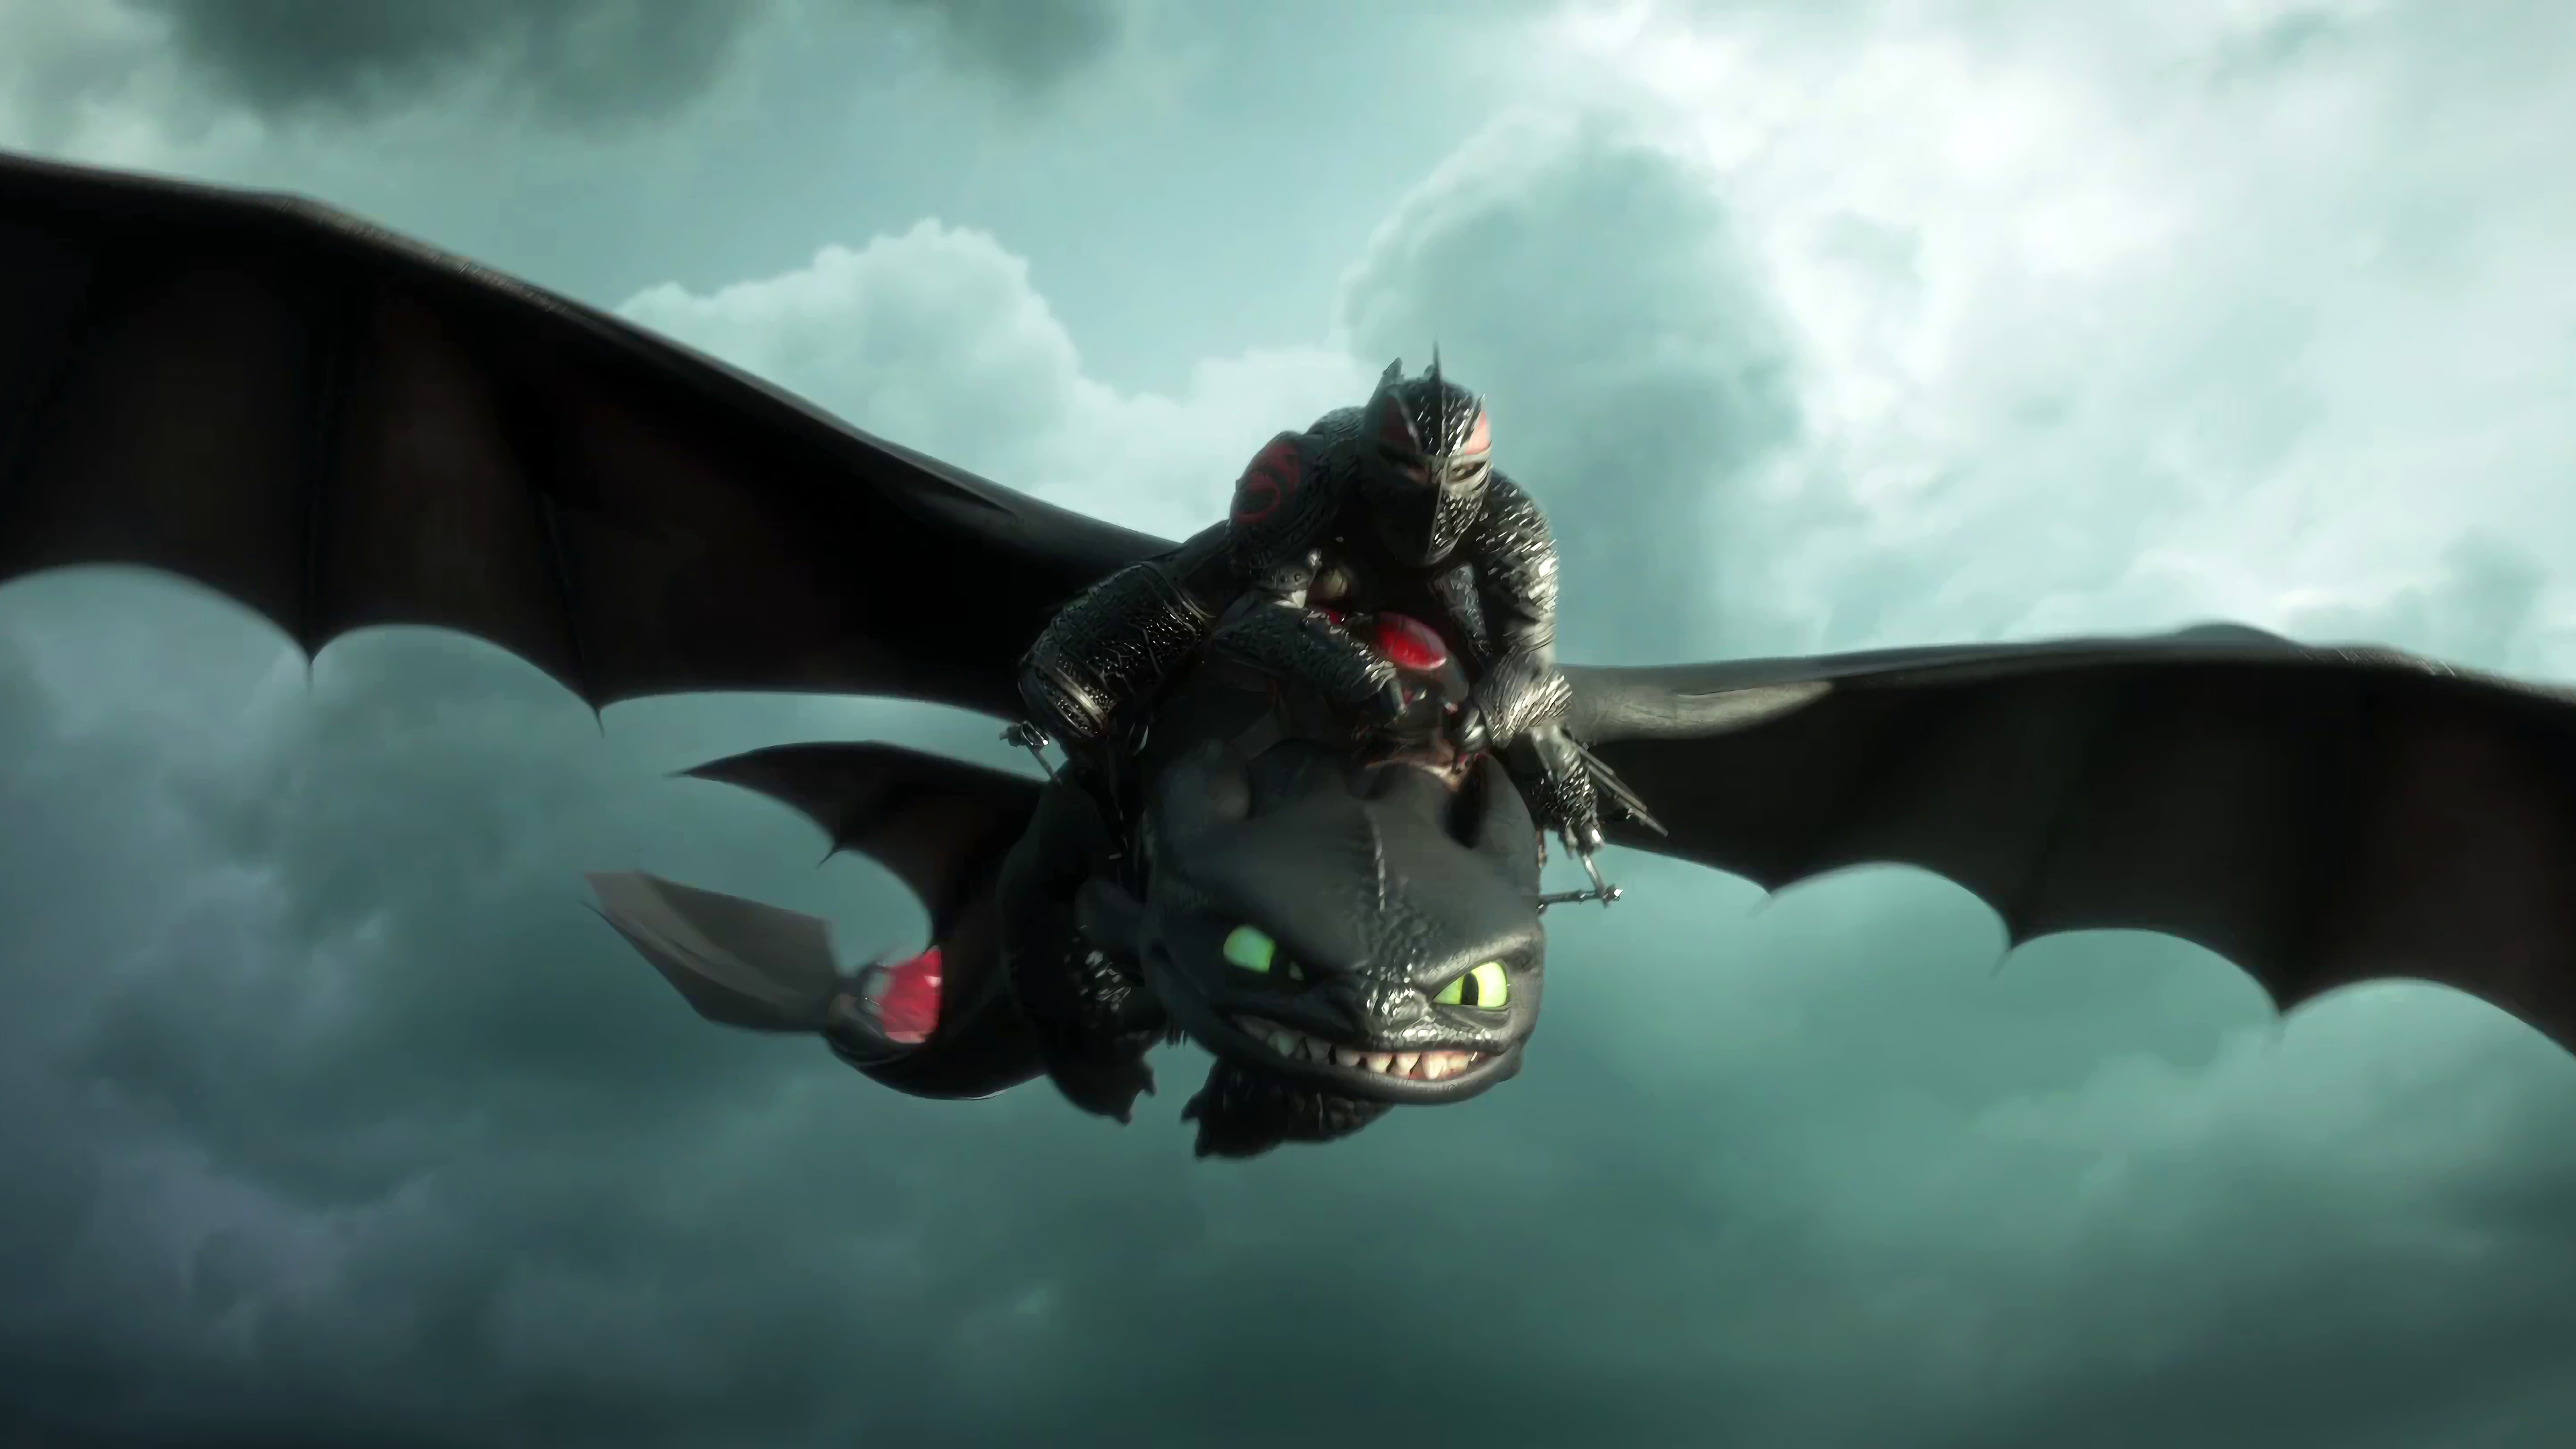 Toothless how to Train your Dragon 3